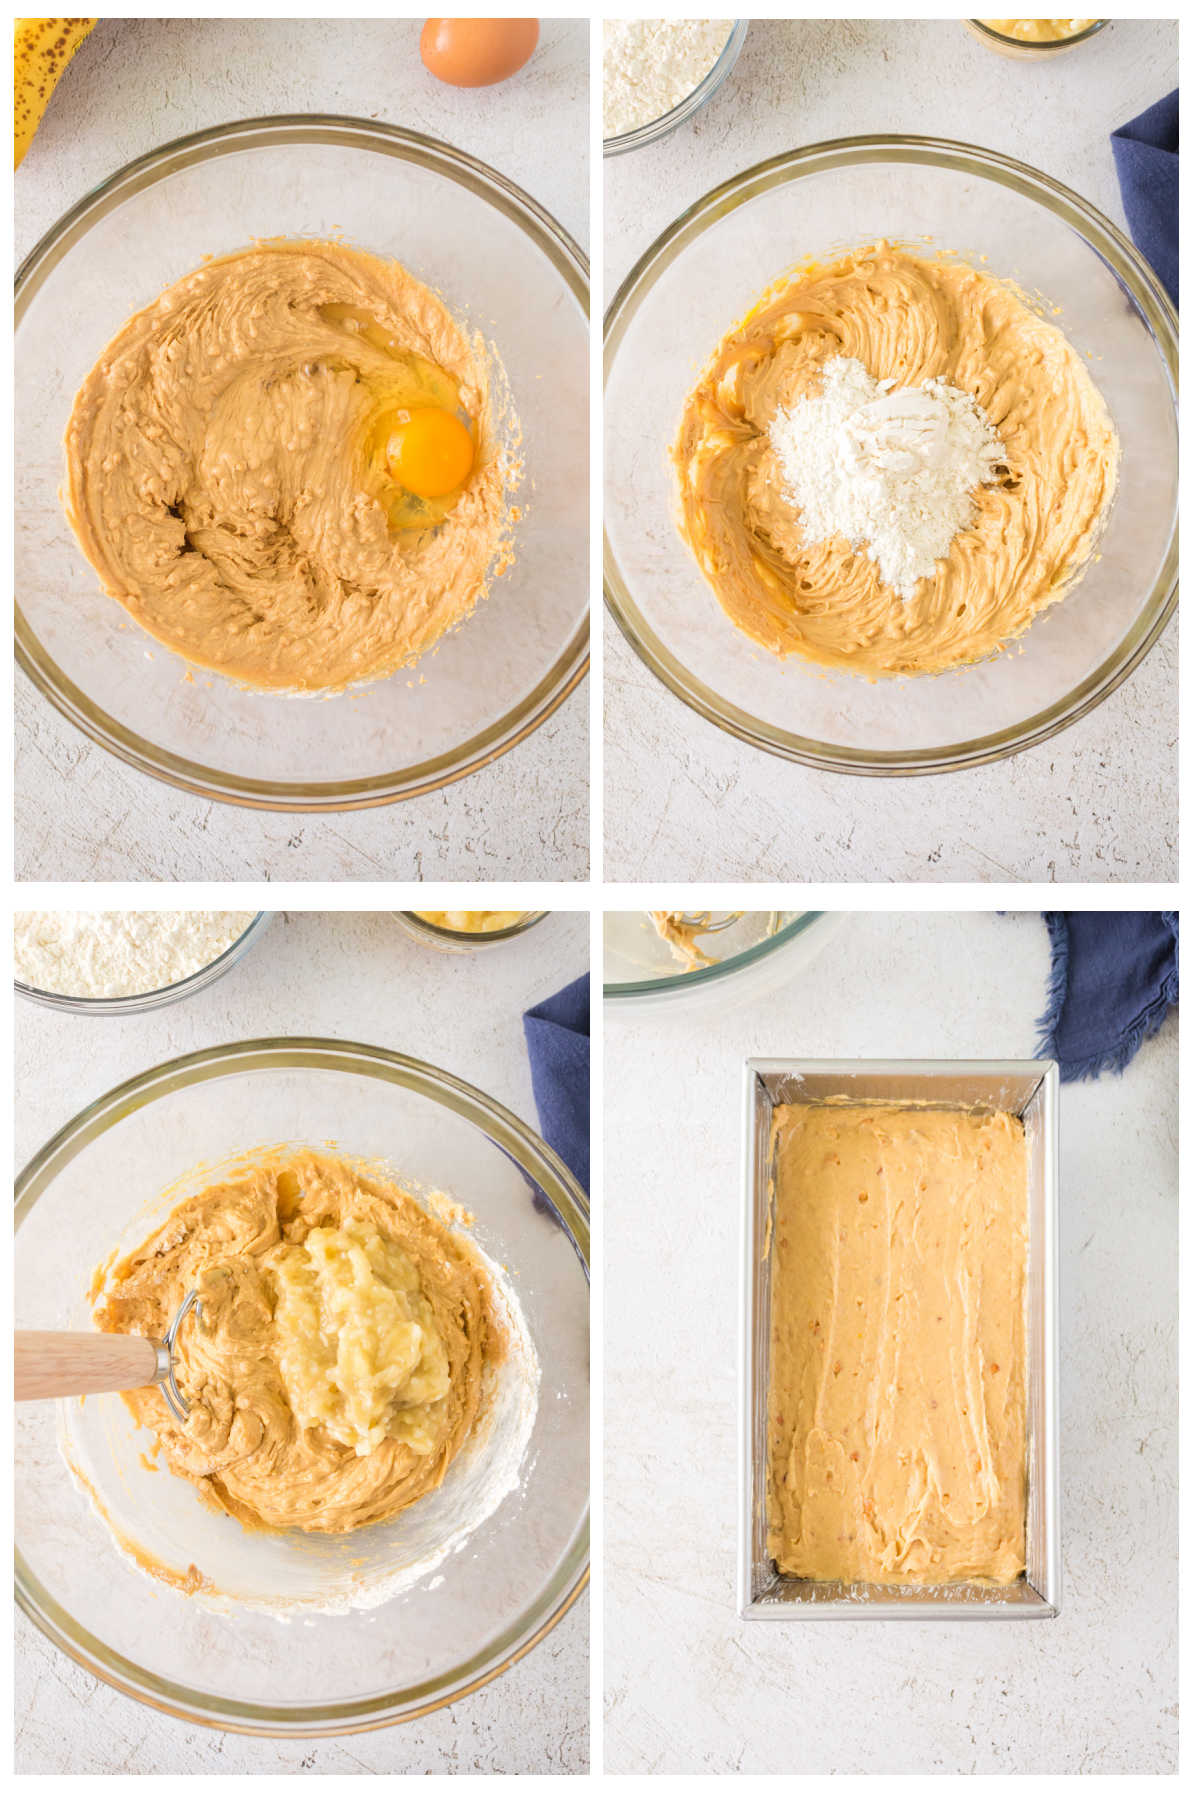 Step by step images showing how to make peanut butter banana bread.